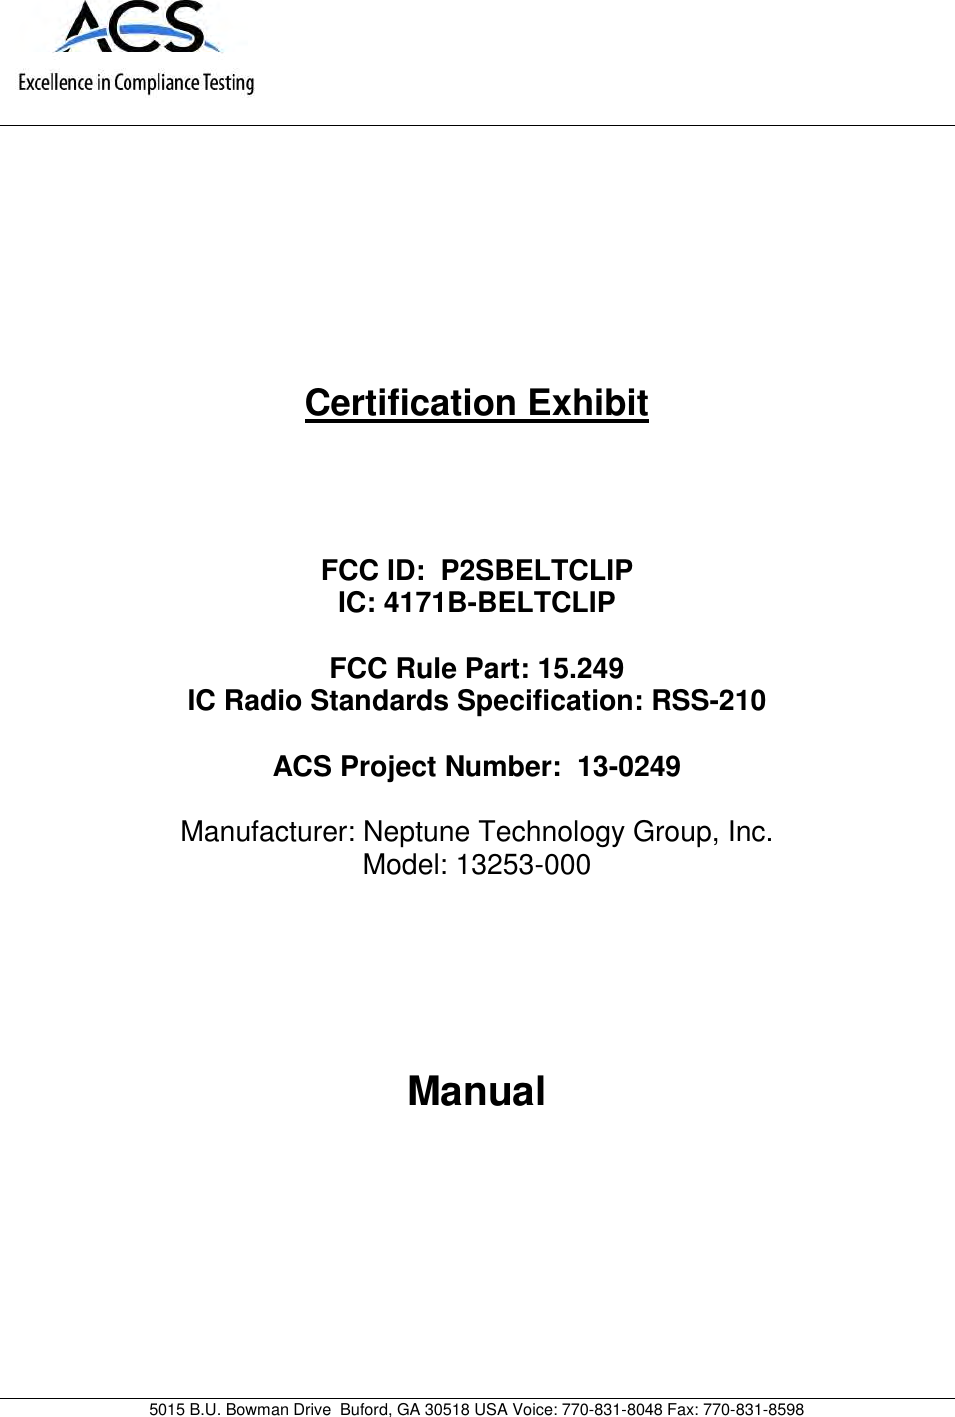 5015 B.U. Bowman Drive Buford, GA 30518 USA Voice: 770-831-8048 Fax: 770-831-8598Certification ExhibitFCC ID: P2SBELTCLIPIC: 4171B-BELTCLIPFCC Rule Part: 15.249IC Radio Standards Specification: RSS-210ACS Project Number: 13-0249Manufacturer: Neptune Technology Group, Inc.Model: 13253-000Manual